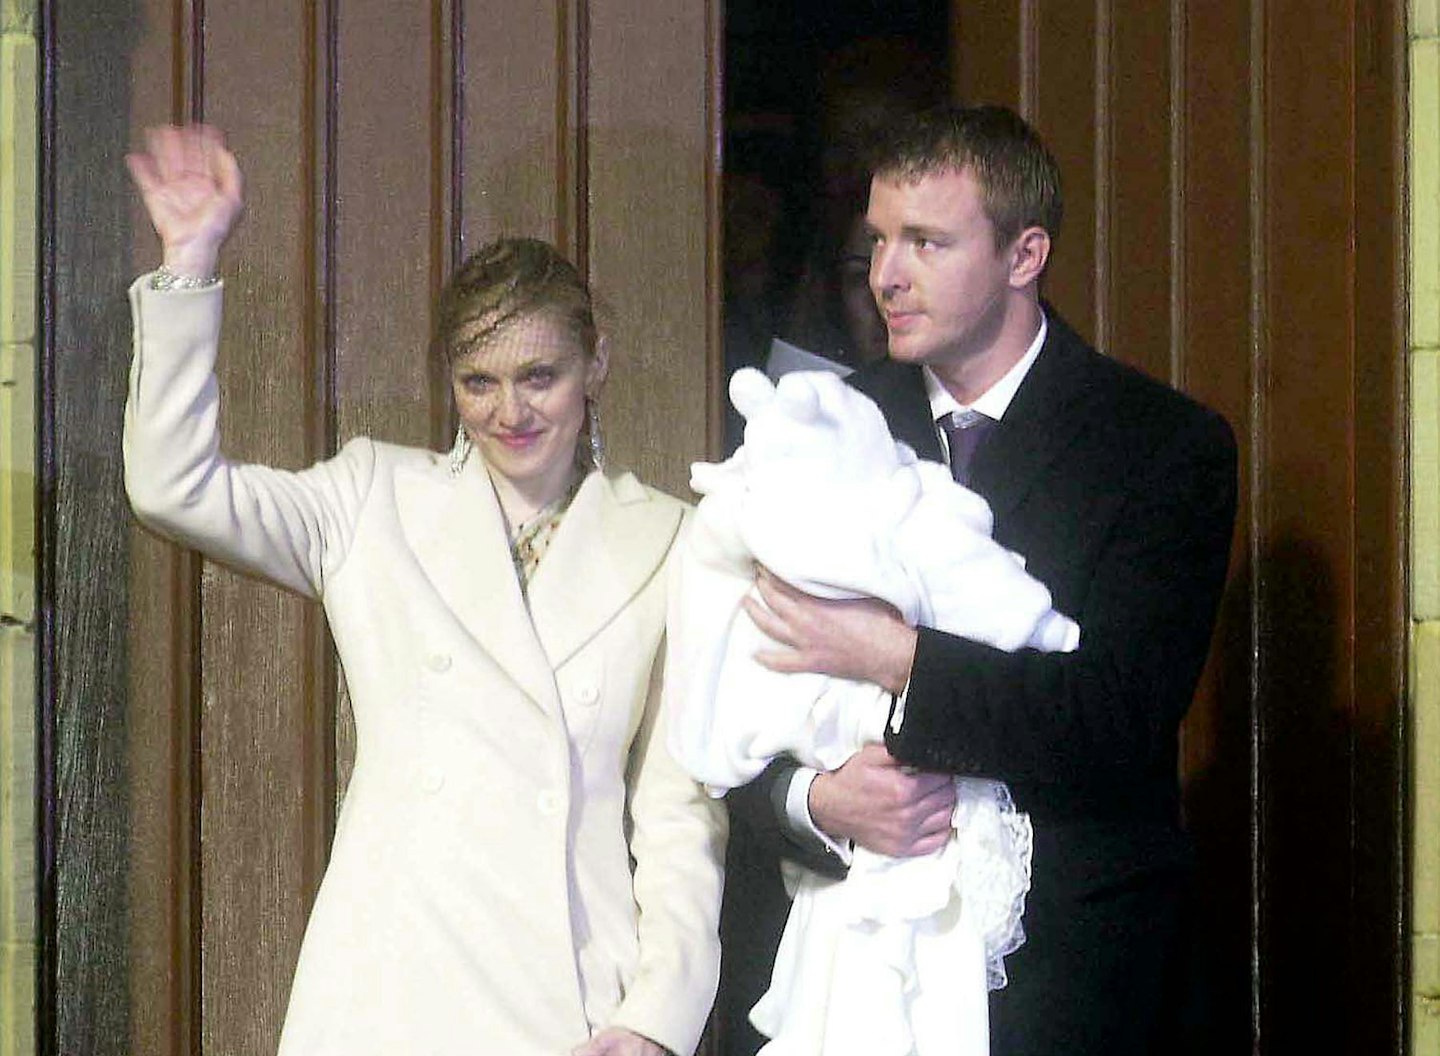 Madonna and Guy Ritchie attend the baptism of their son Rocco at Dornoch Cathedral December 21, 2000 in Scotland